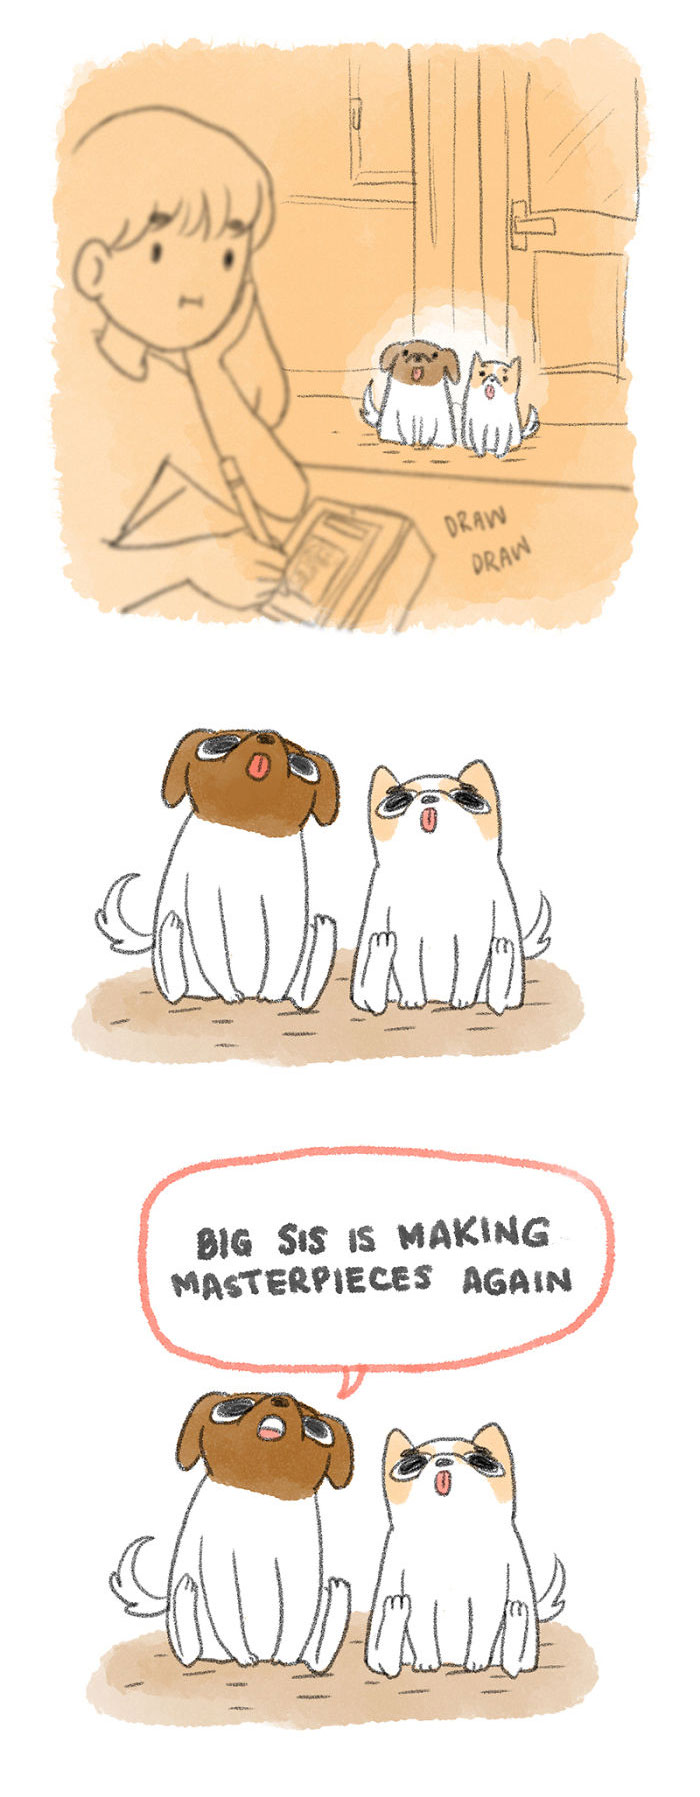 10 Funny And Relatable Comics That Depict The Struggle Of Dog Owners (Including Me)